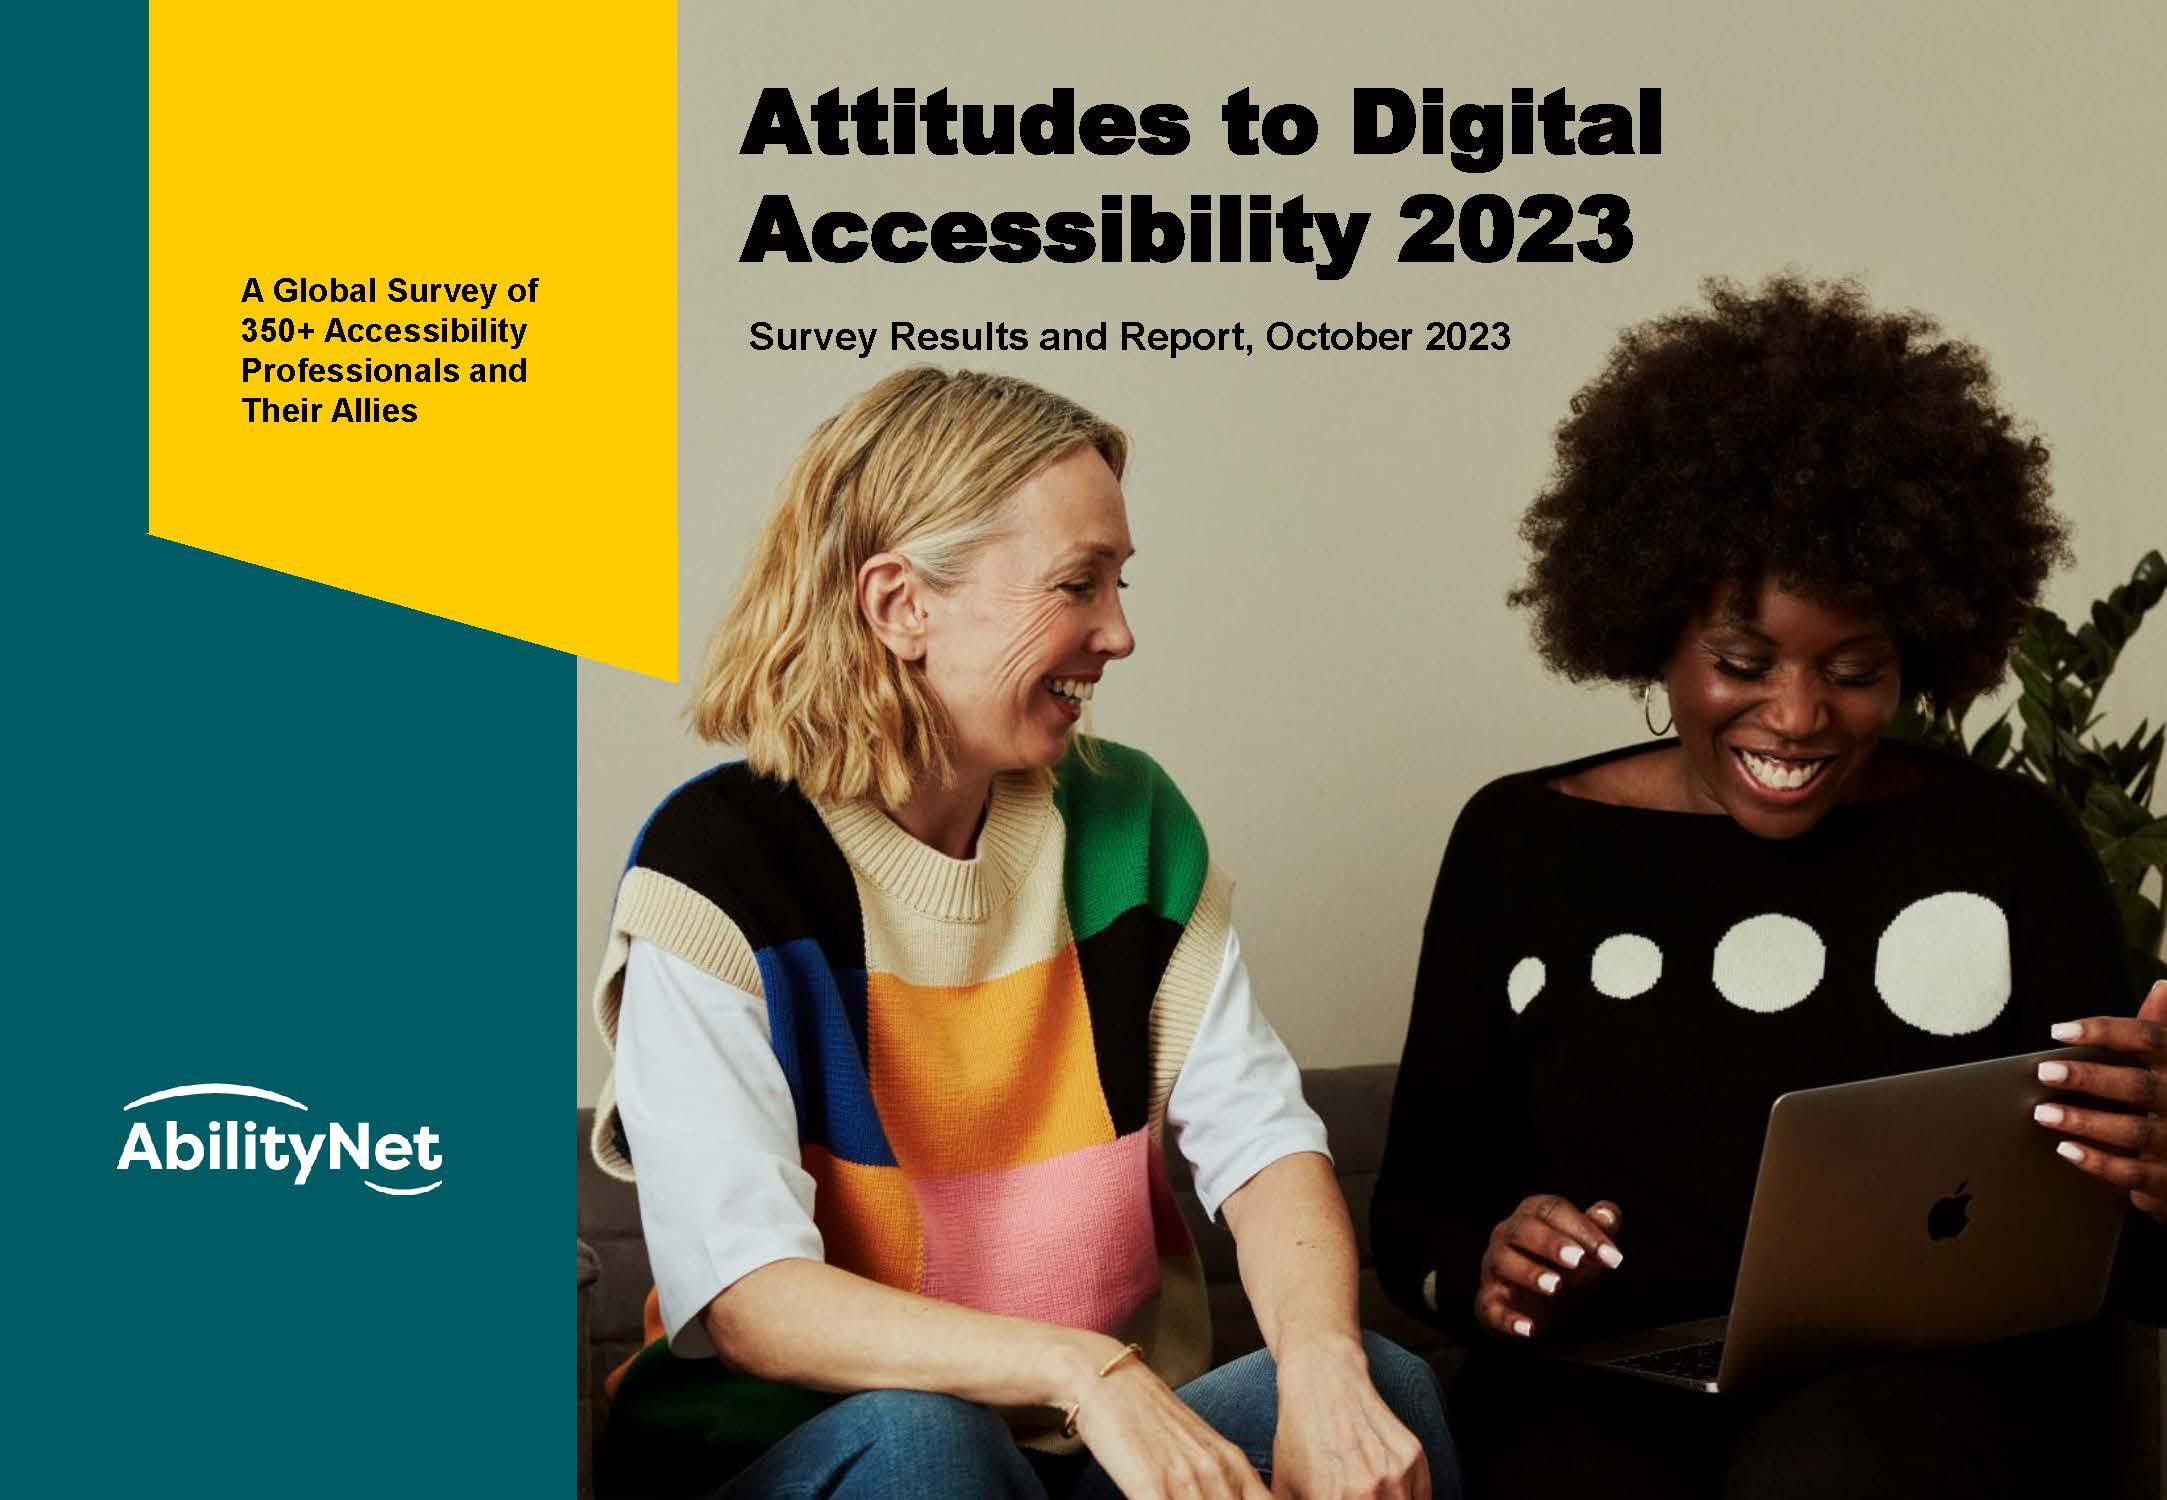 Two women smiling looking at laptop in informal setting. Text reads: Attitudes to Digital Accessibility Survey 2023 results report. A global survey of 350+ Accessibility professionals and their allies